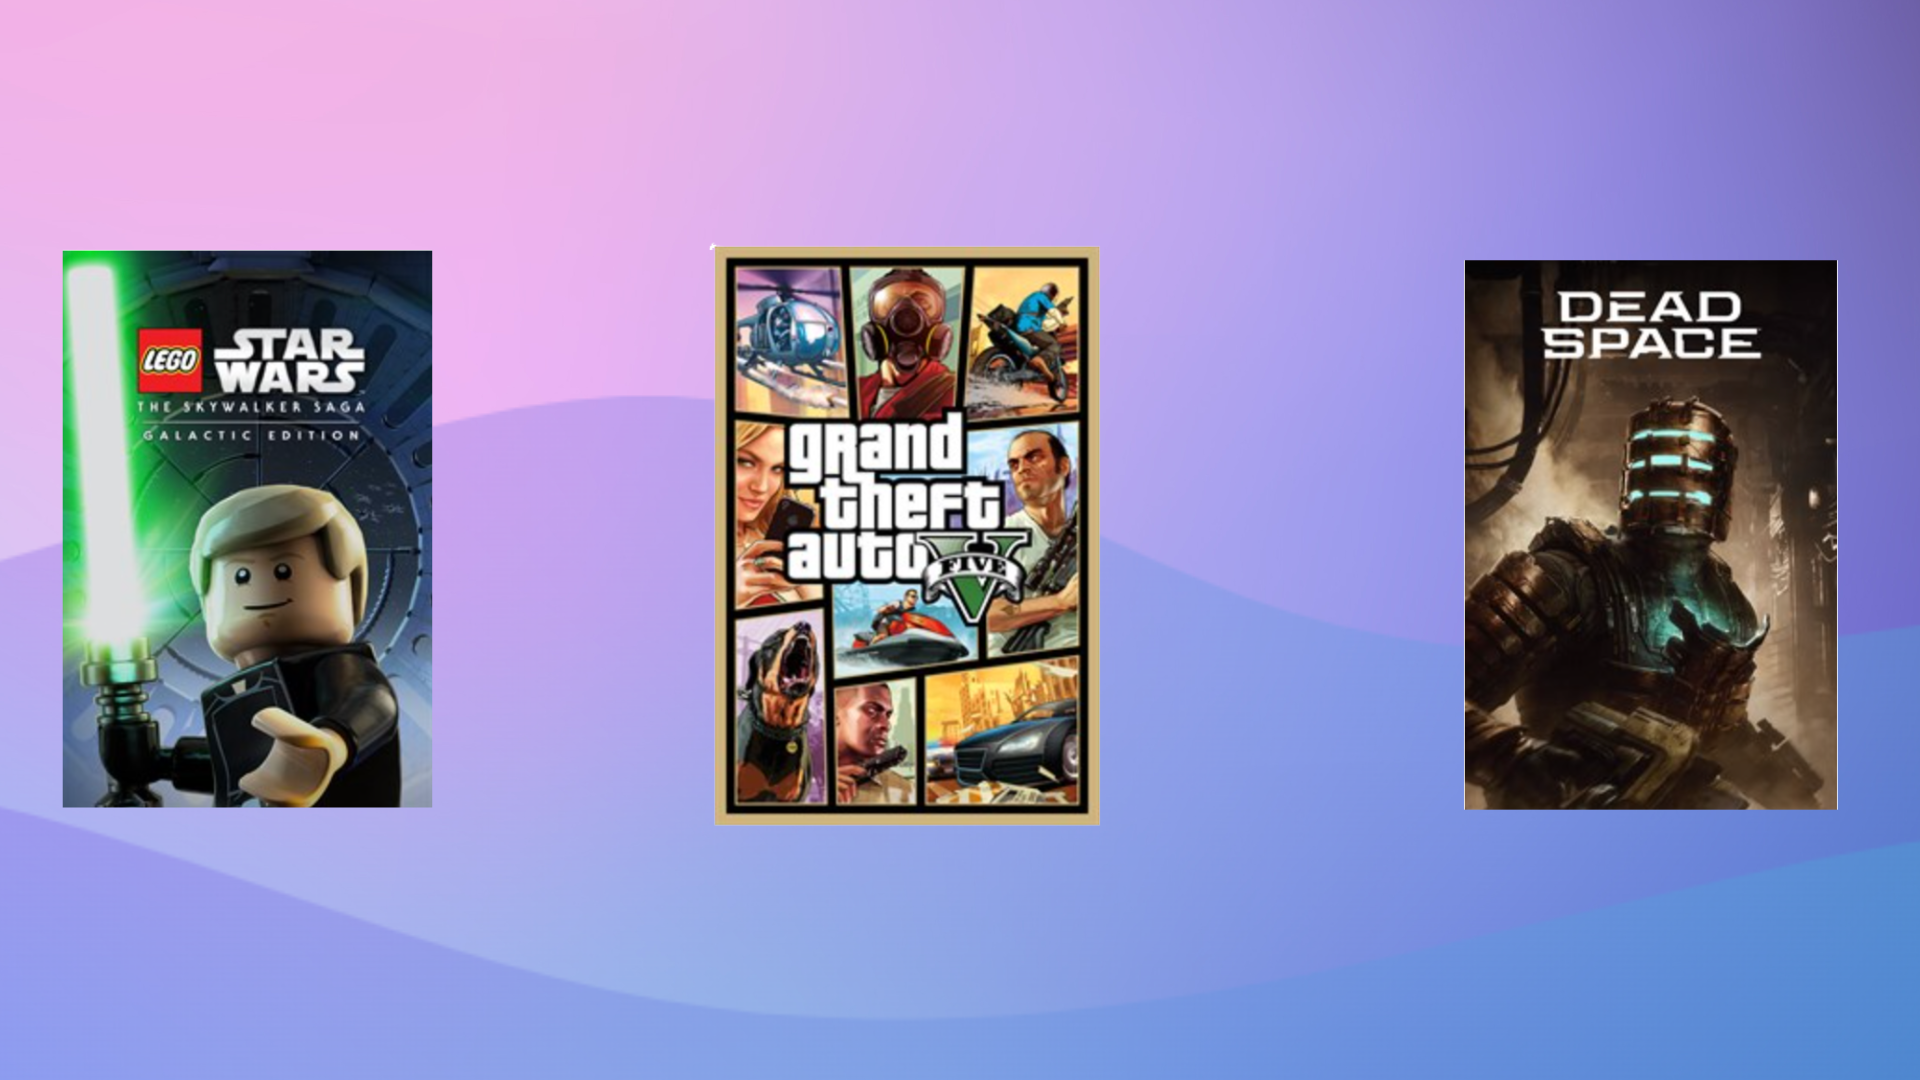 grand theft auto, lego star wars, and dead space against purple and blue background